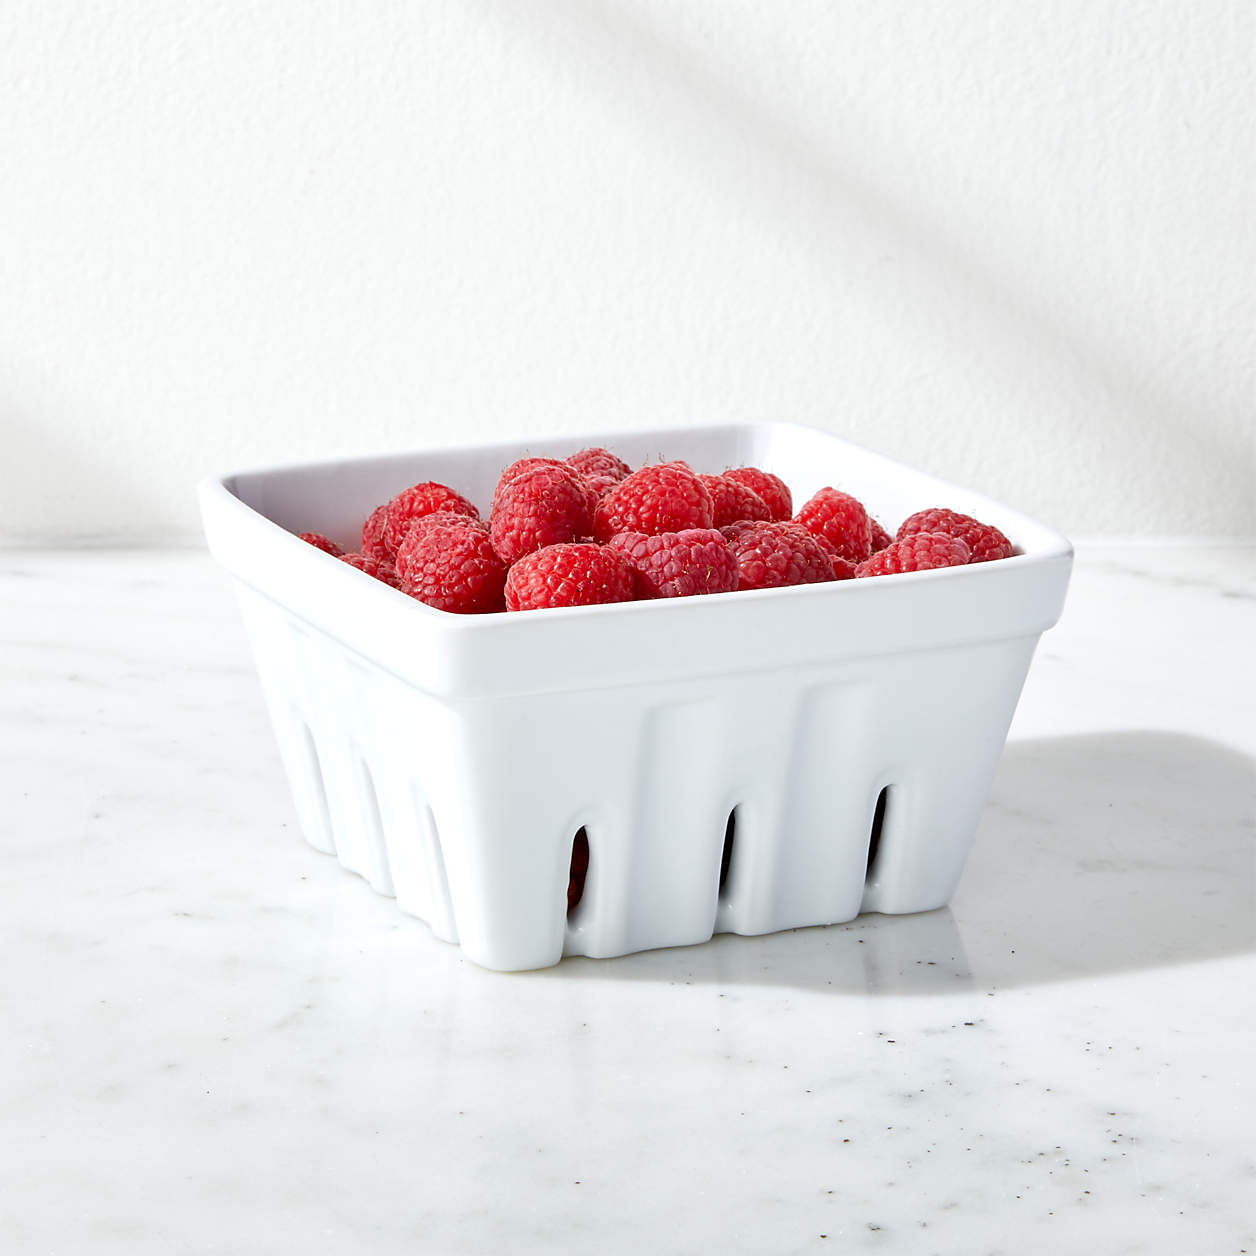 4 x 4 x 3 Textured Stoneware Colander Square Berry Baskets Red Co Set of 4 Dark Multi-Color Bowls 